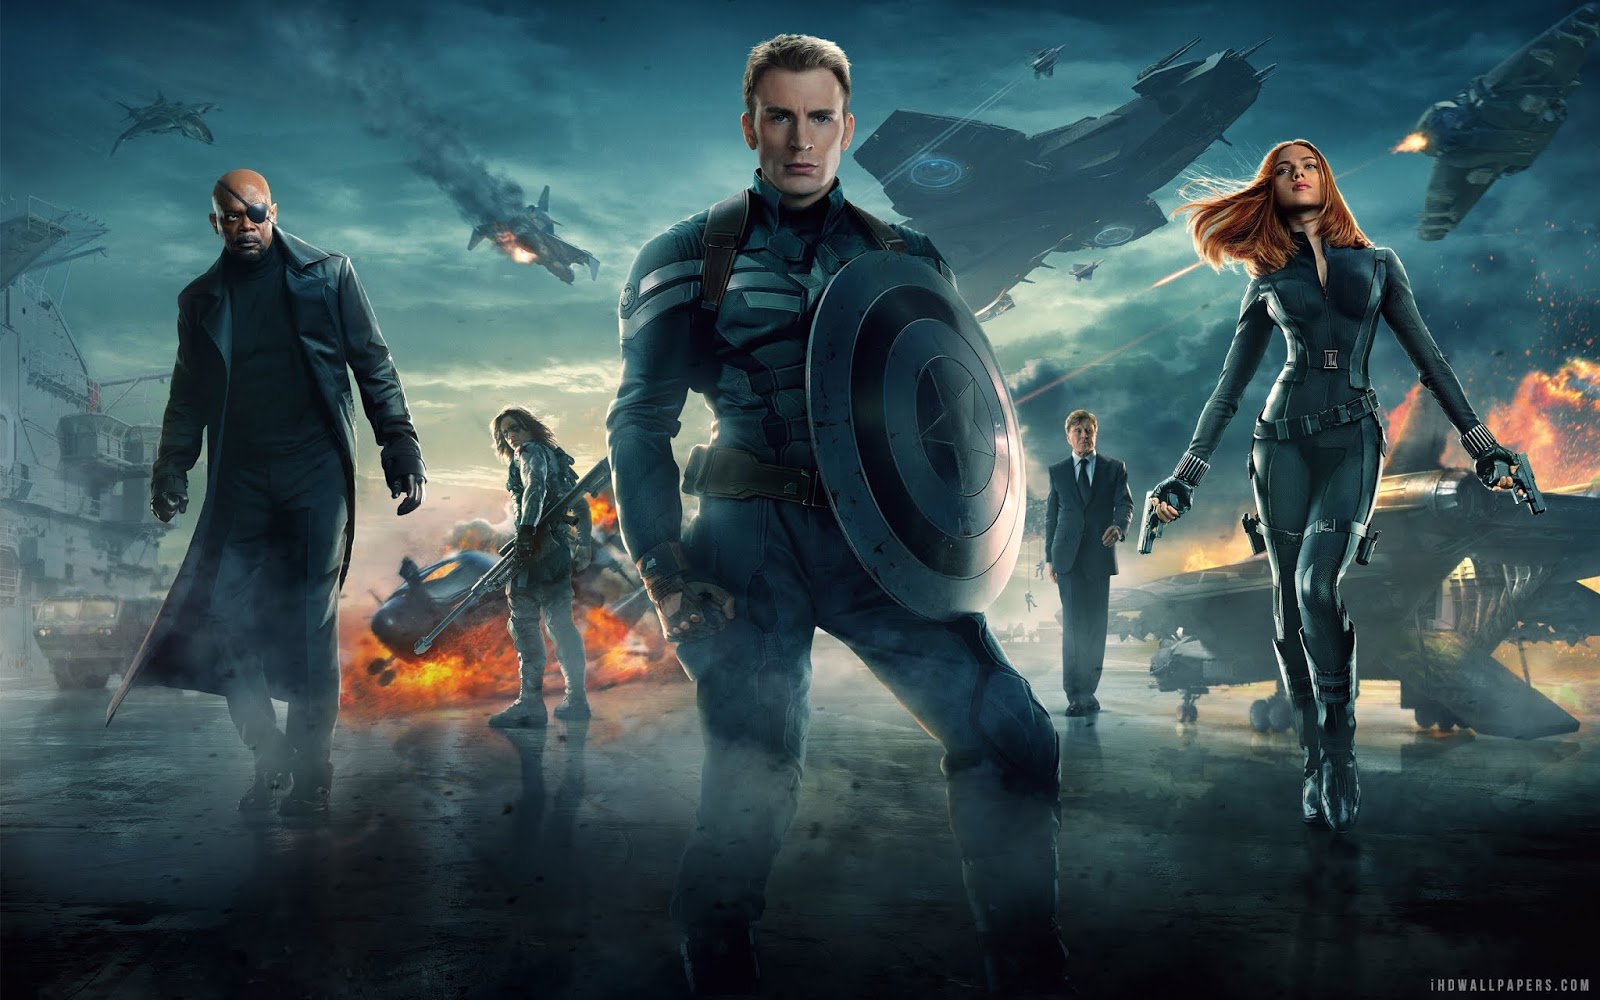 If You Have Enough Movie Knowledge, You Shouldn’t Break a Sweat Passing This Film Quiz Captain America The Winter Soldier (2014)